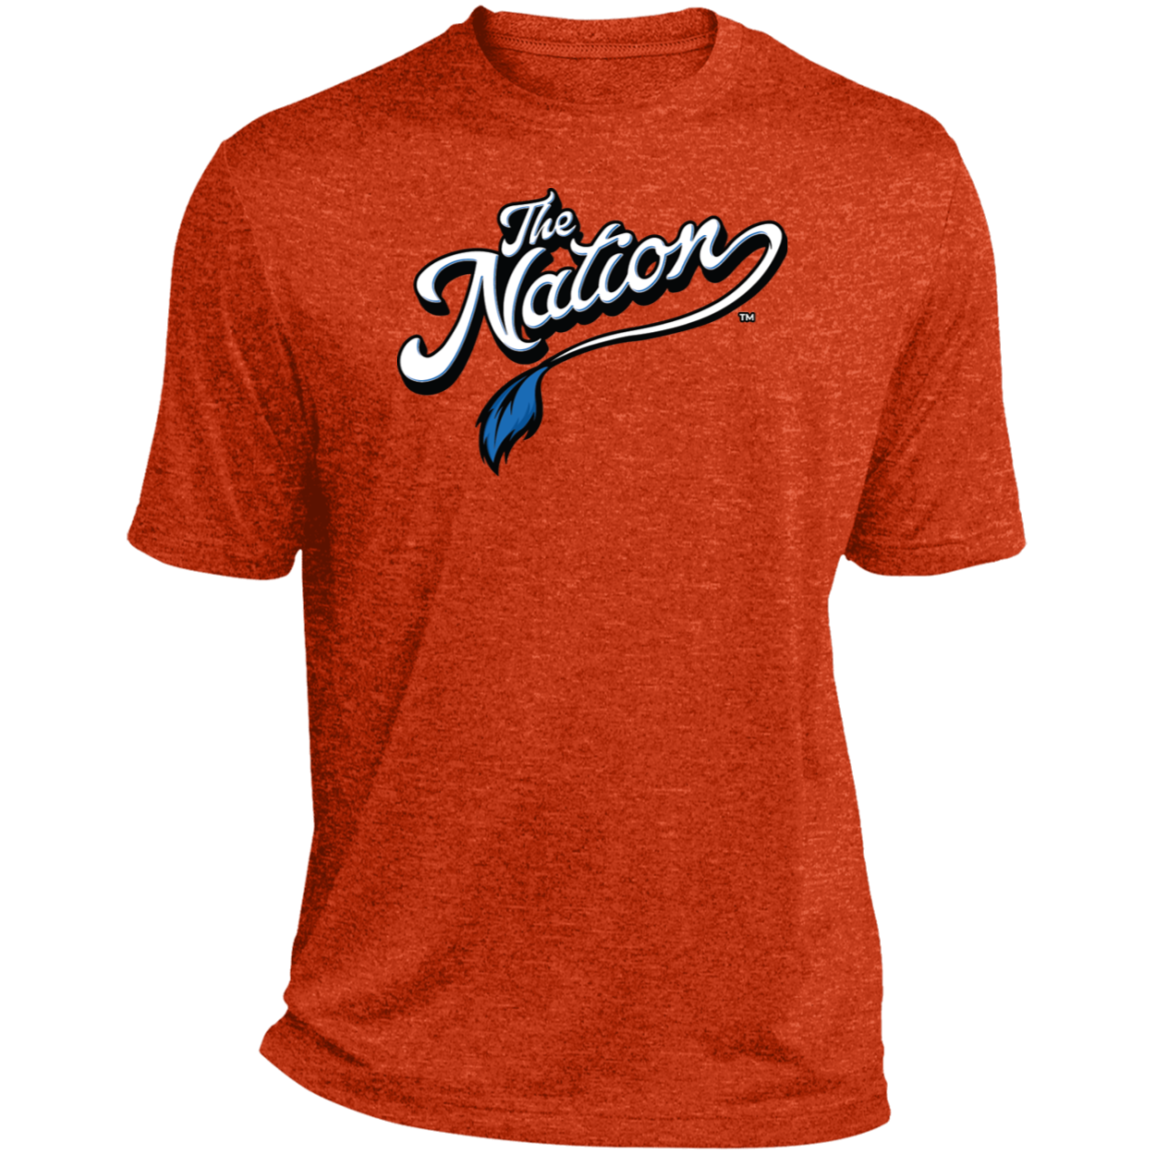 The Nation™ Men's Heather Performance Tee